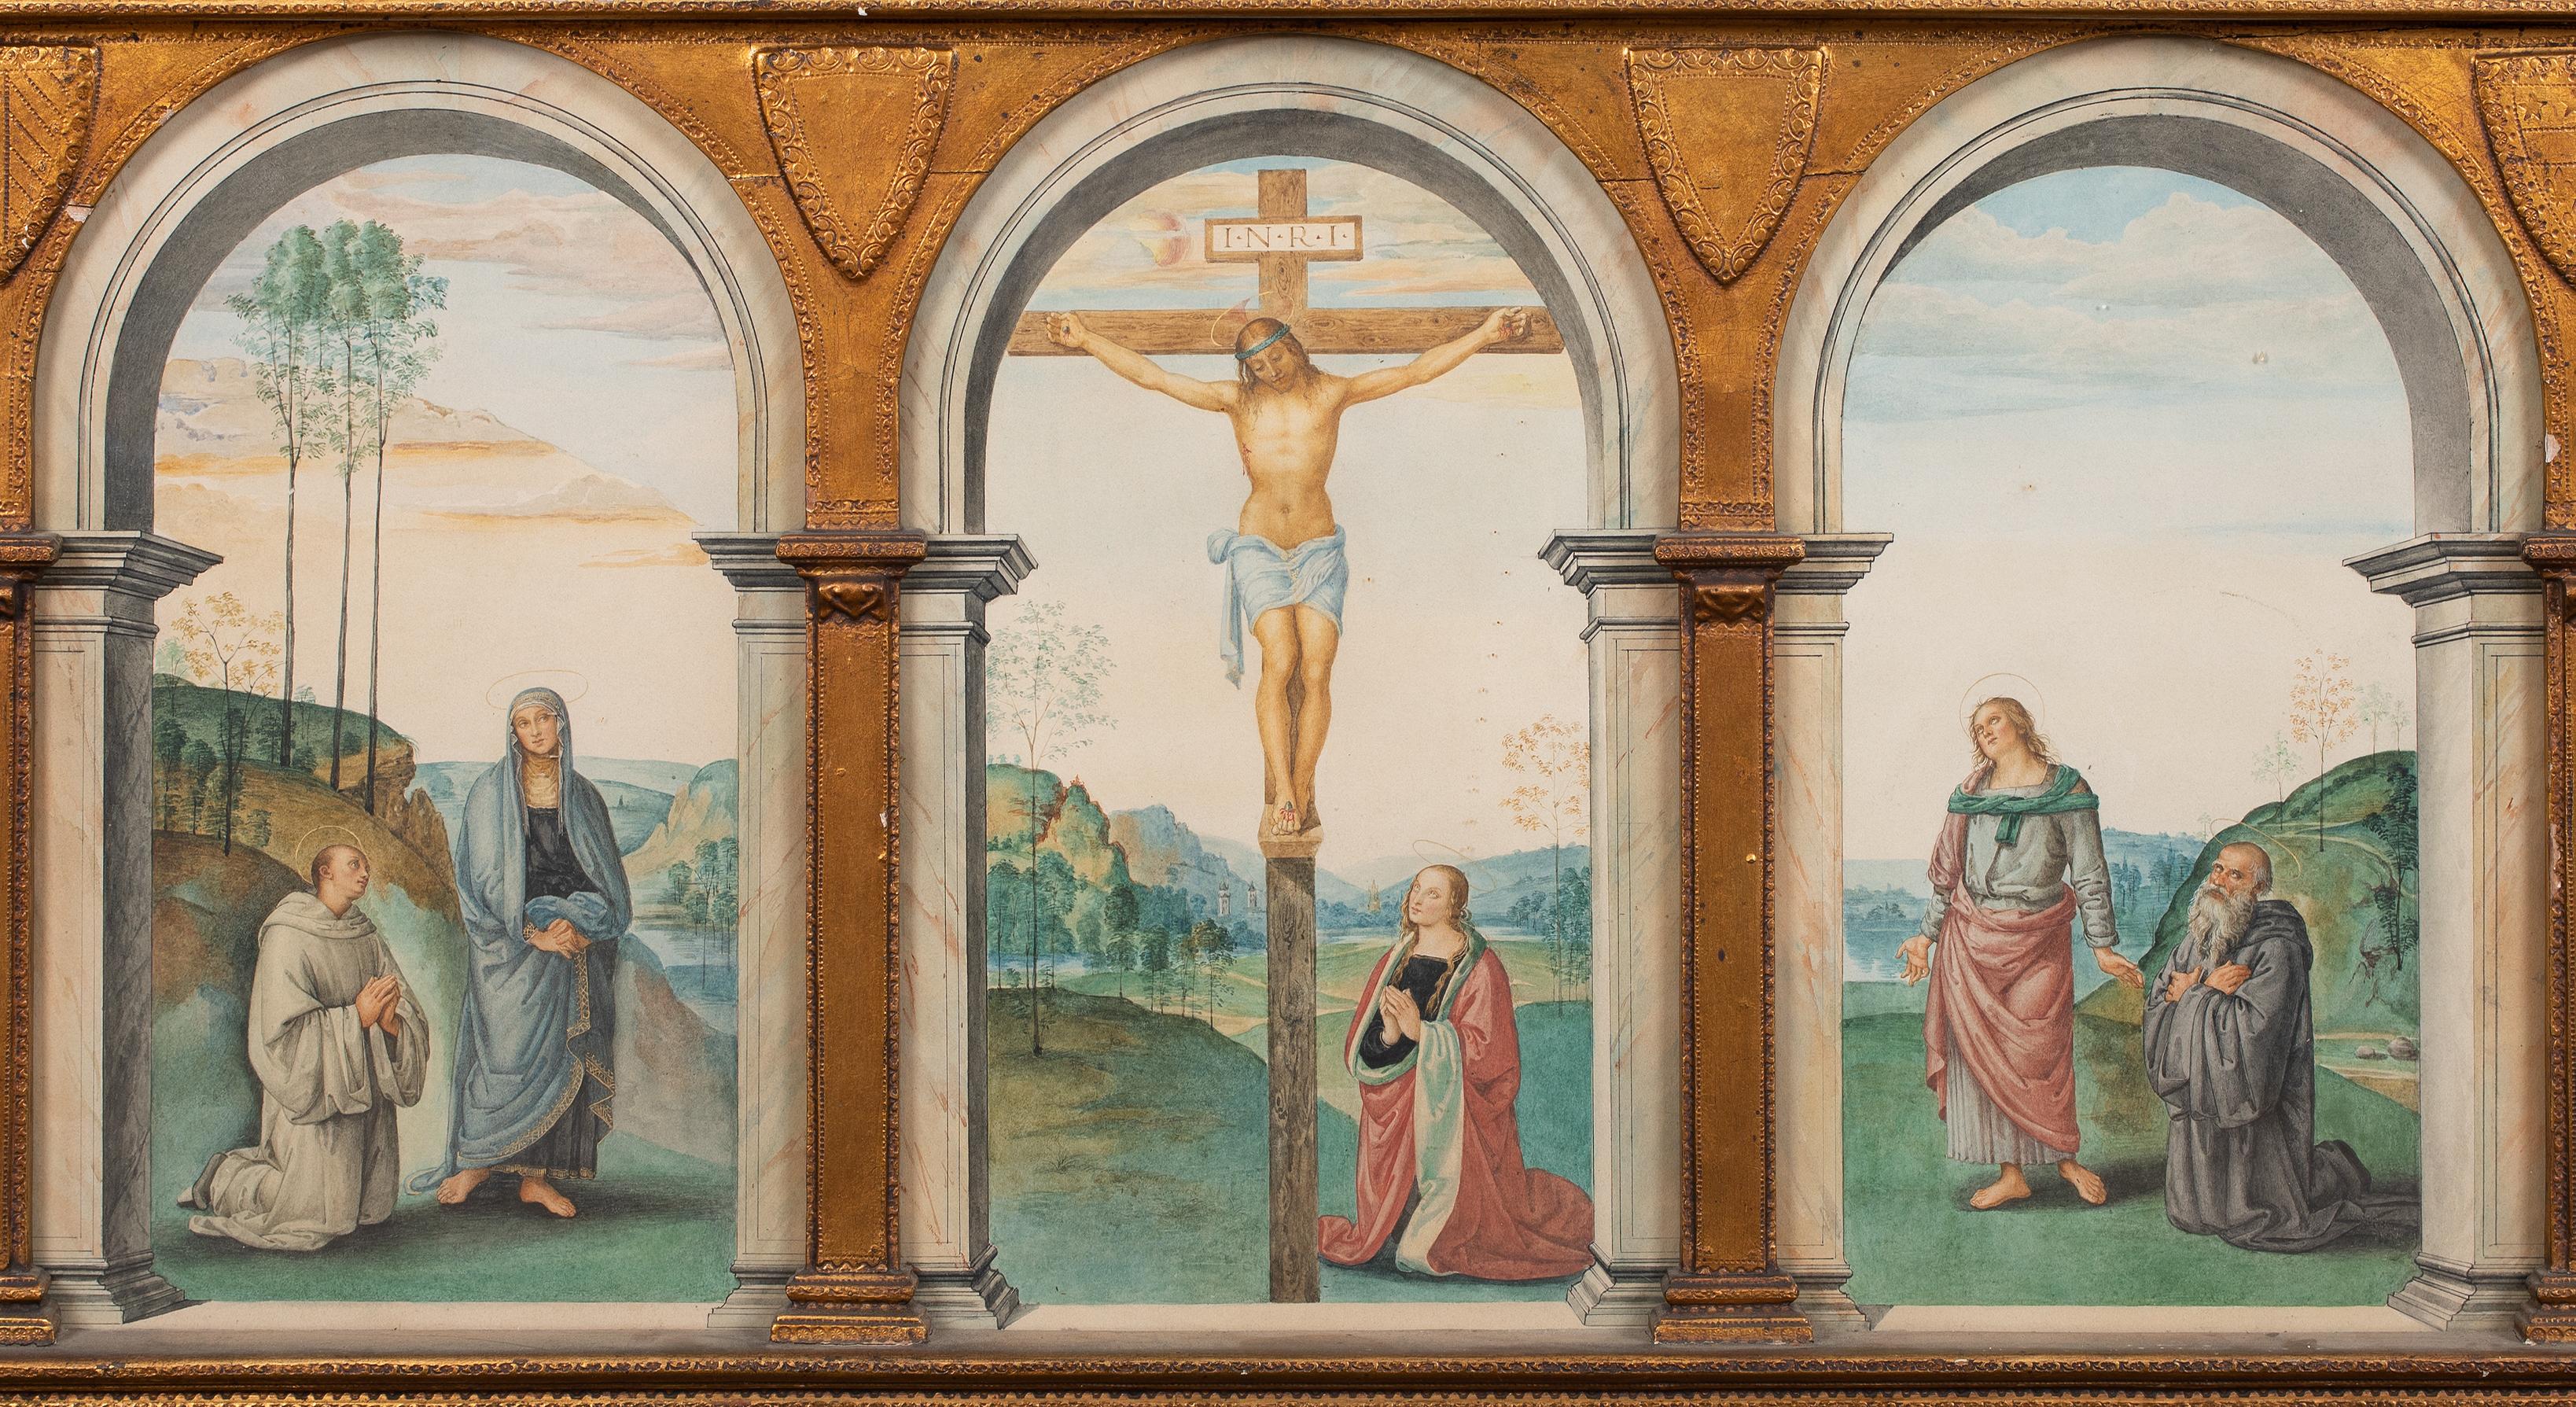 Triptych Of The Crucifixion, 19th Century

after PIETRO PERUGINO (1446-1523)

Large circa 19th Century Umbrian School Old Master triptych of the Crucifixion, watercolour. Beautiful devotional triptych that would have been commissioned by the church